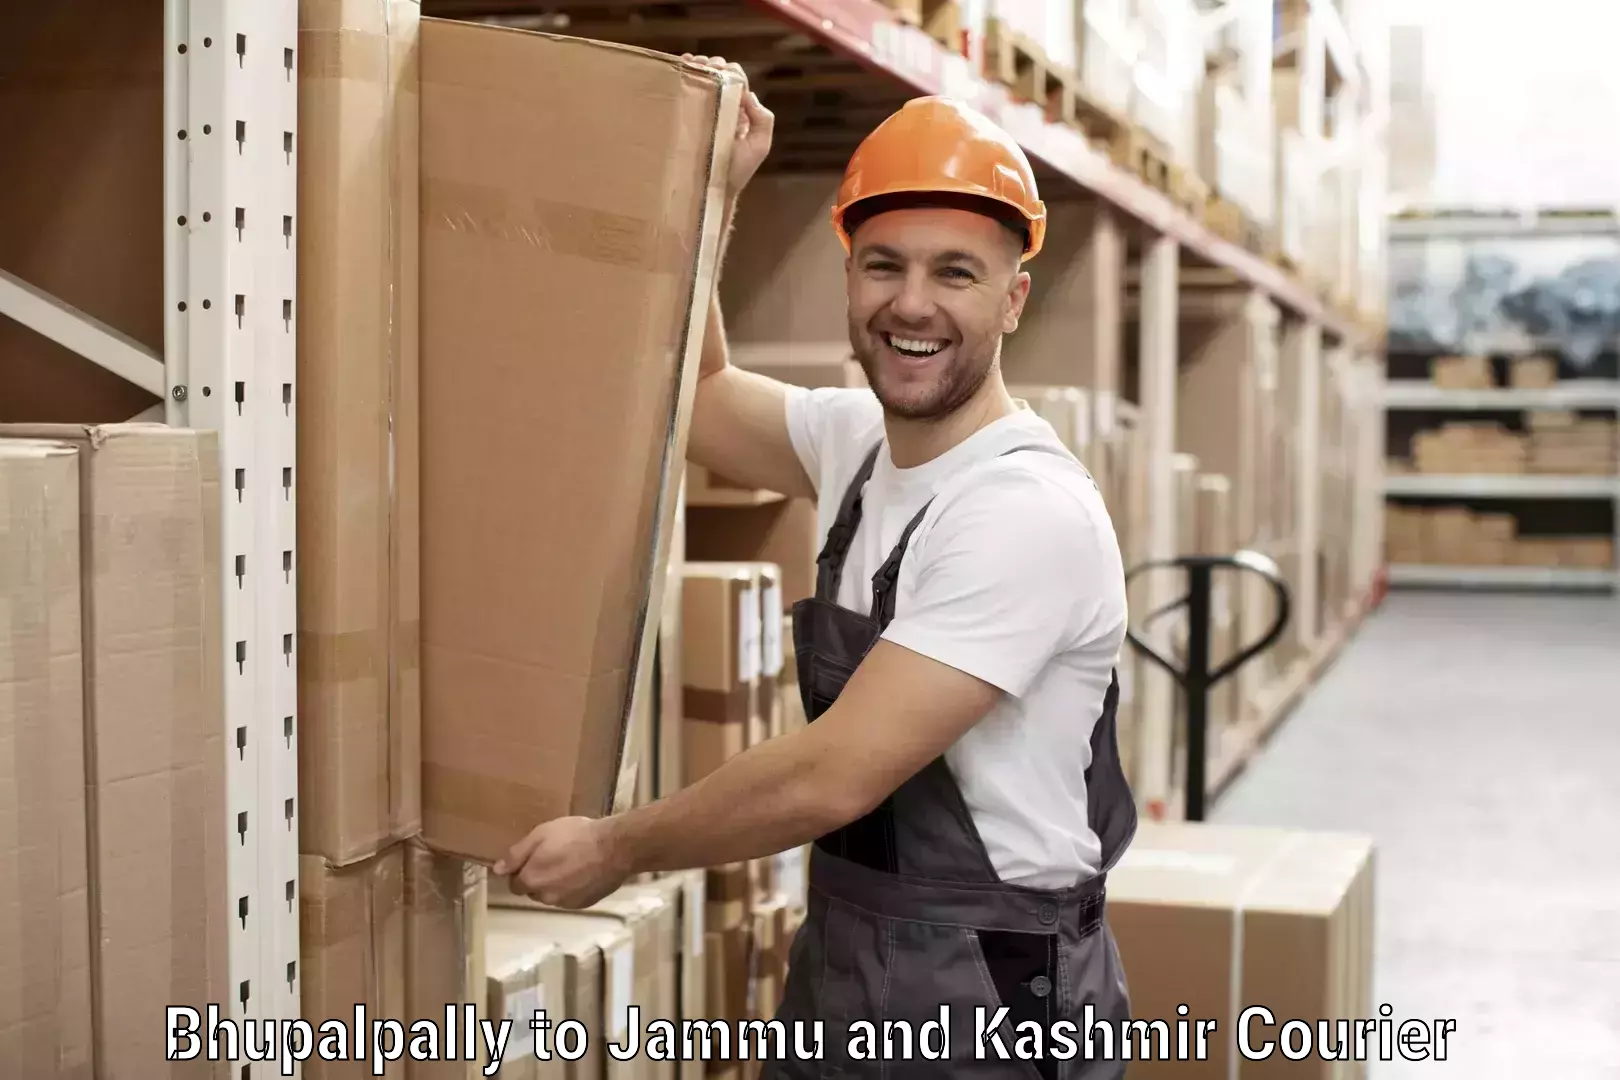 Nationwide parcel services Bhupalpally to Anantnag